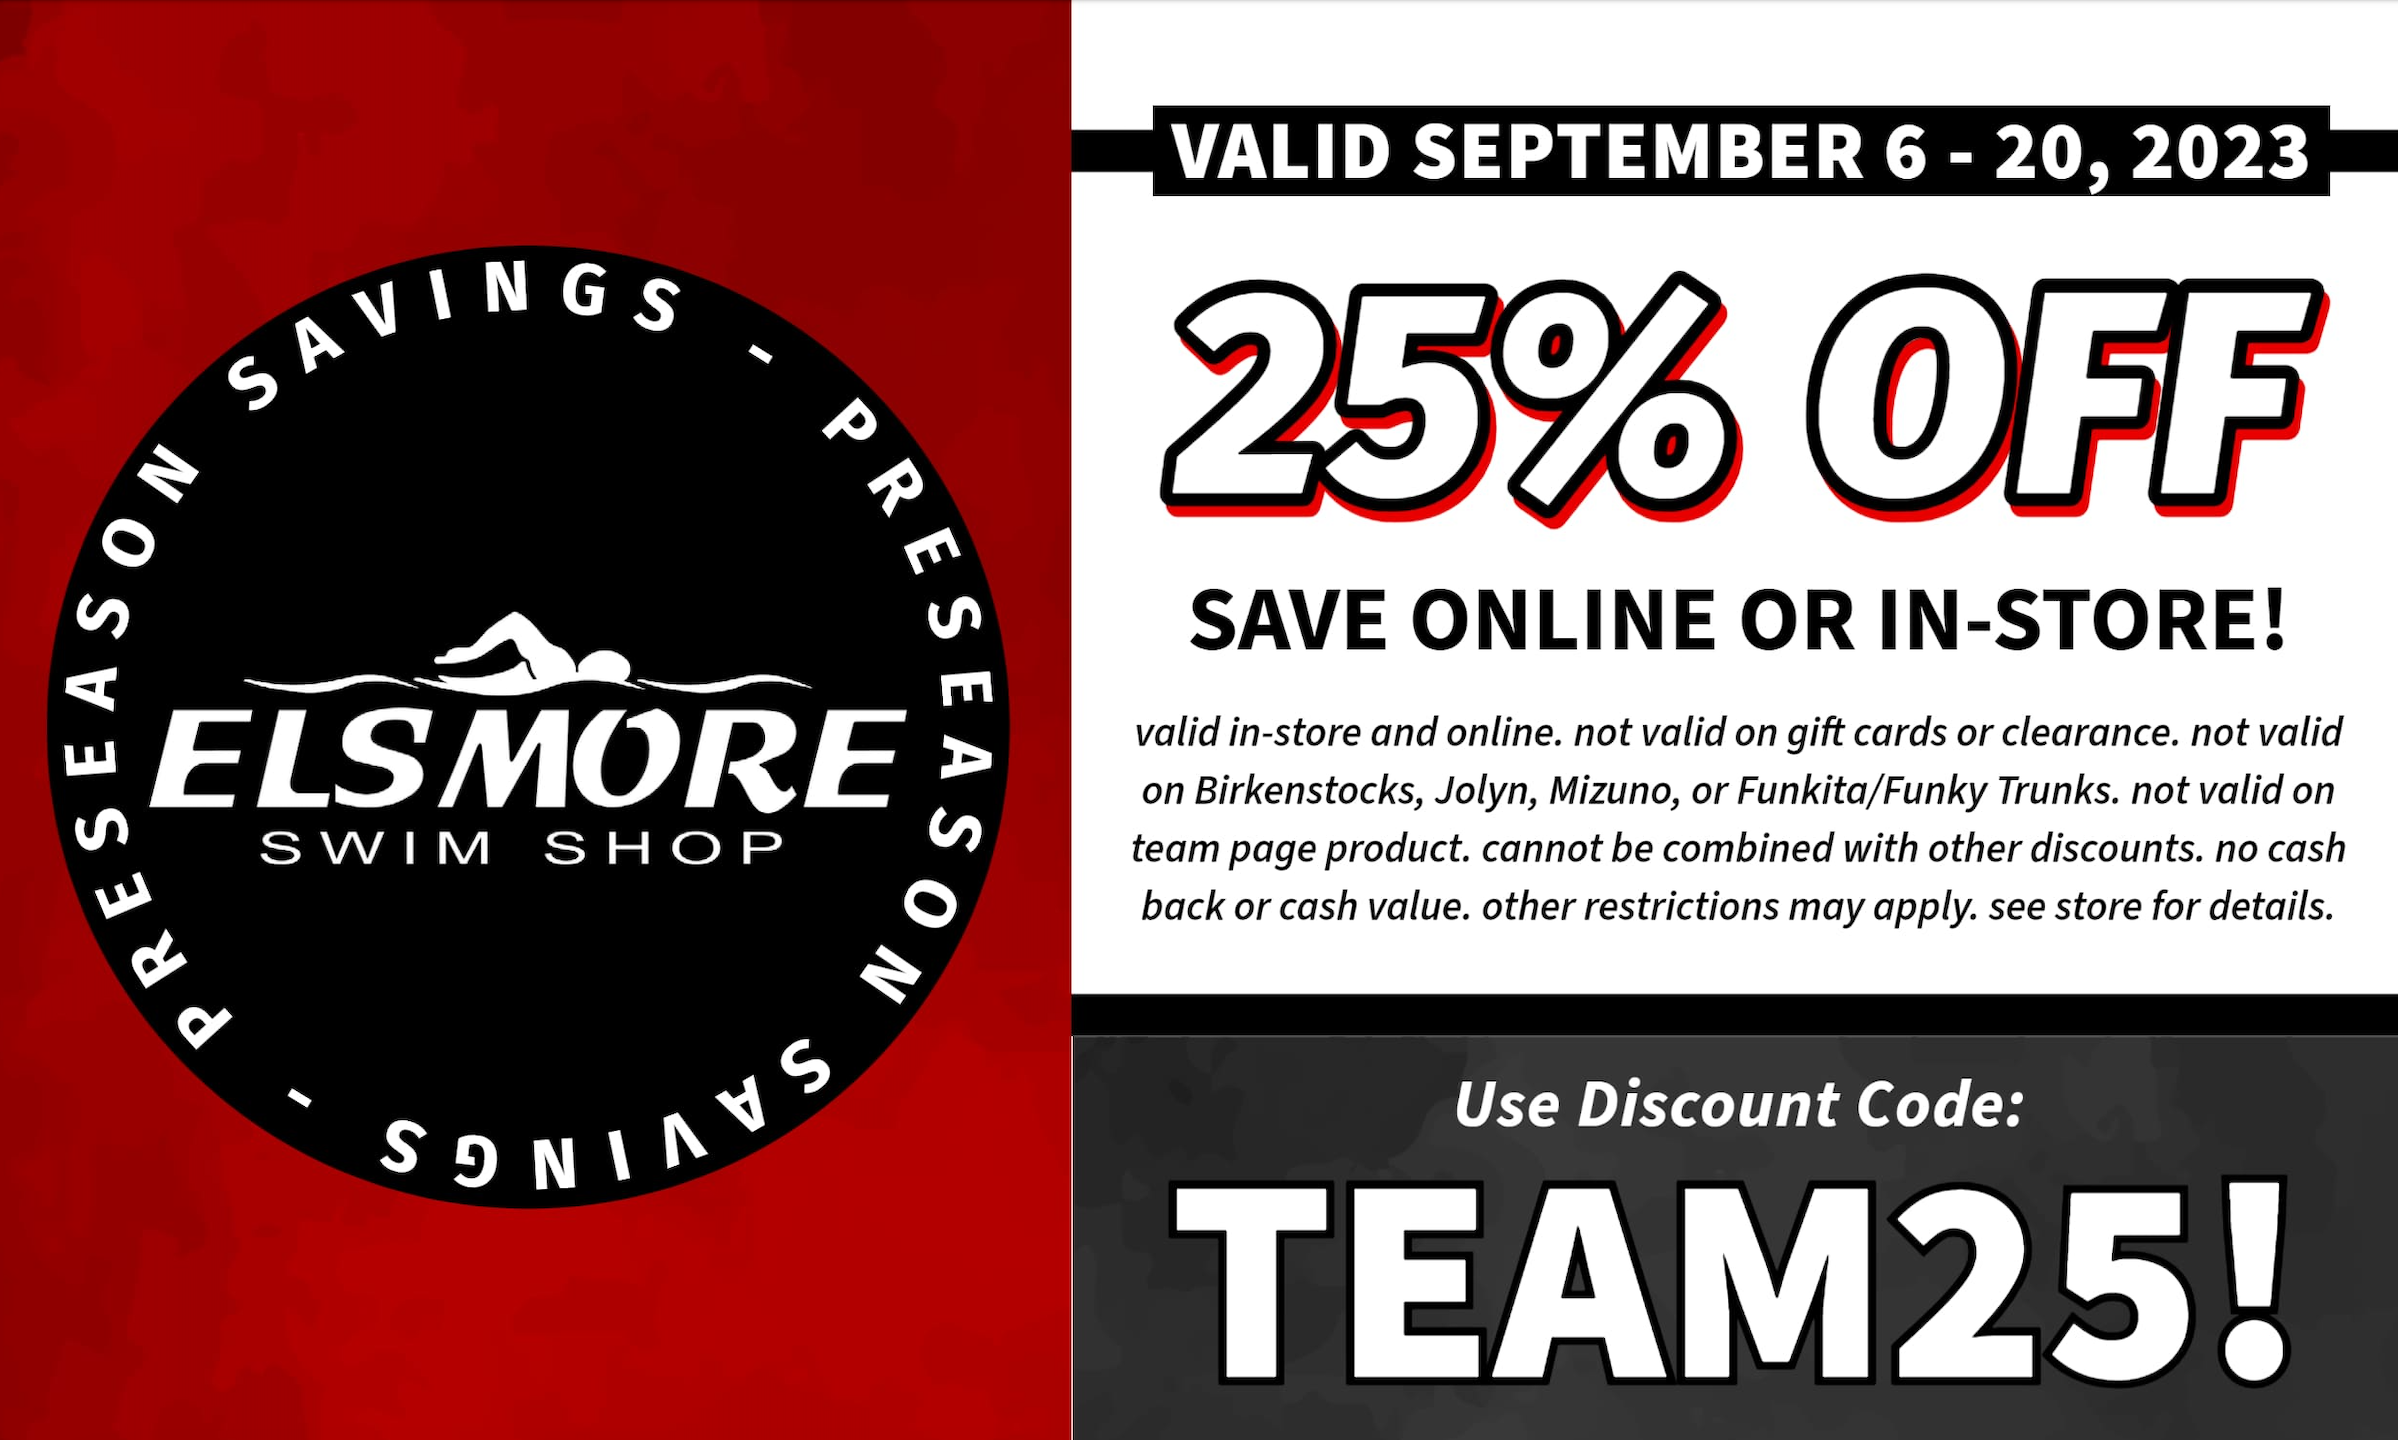 Special Elsmore online discount code for ACE members